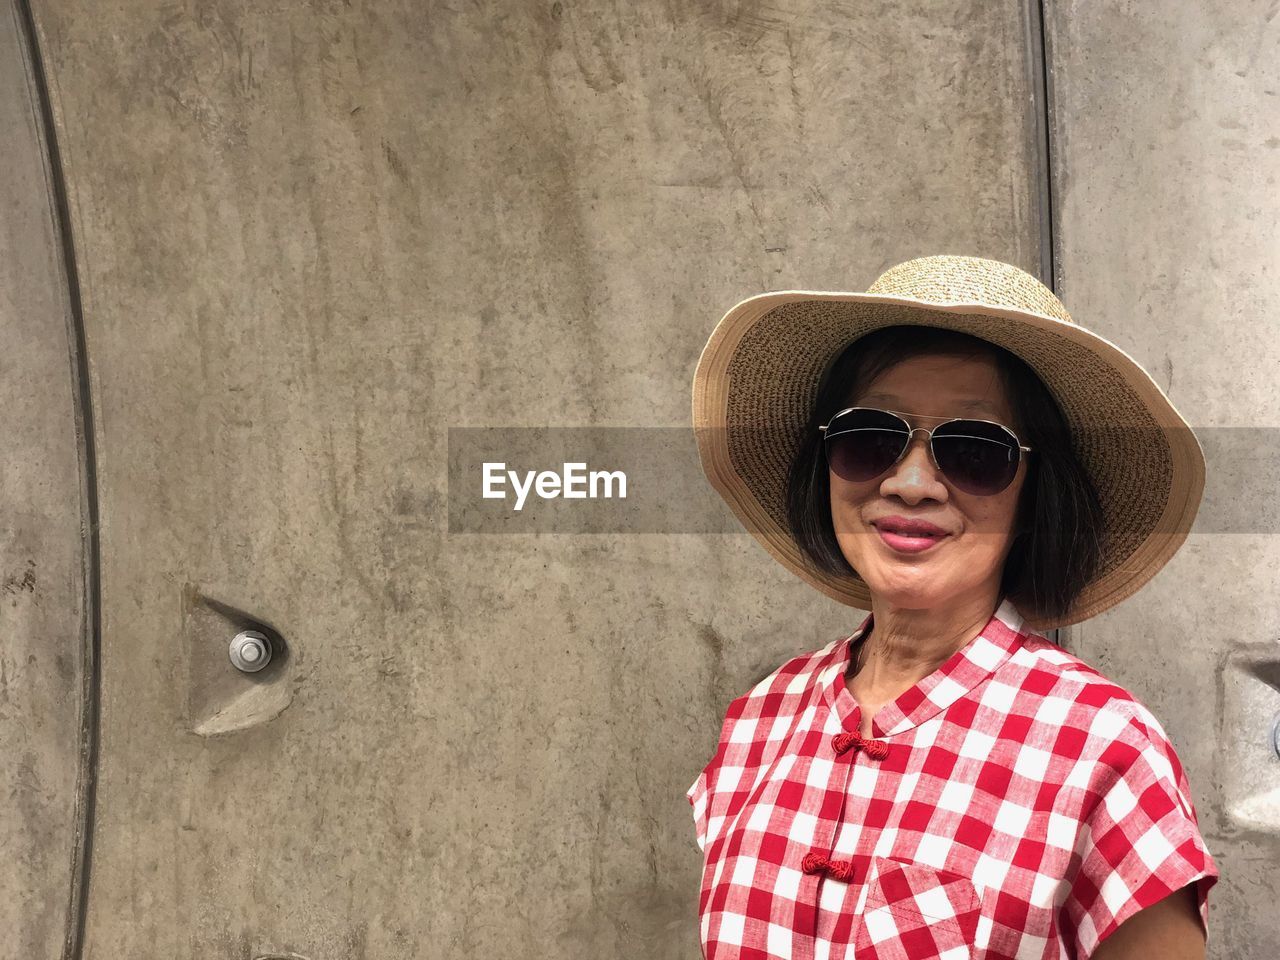 Portrait of smiling woman wearing sunglasses standing against wall